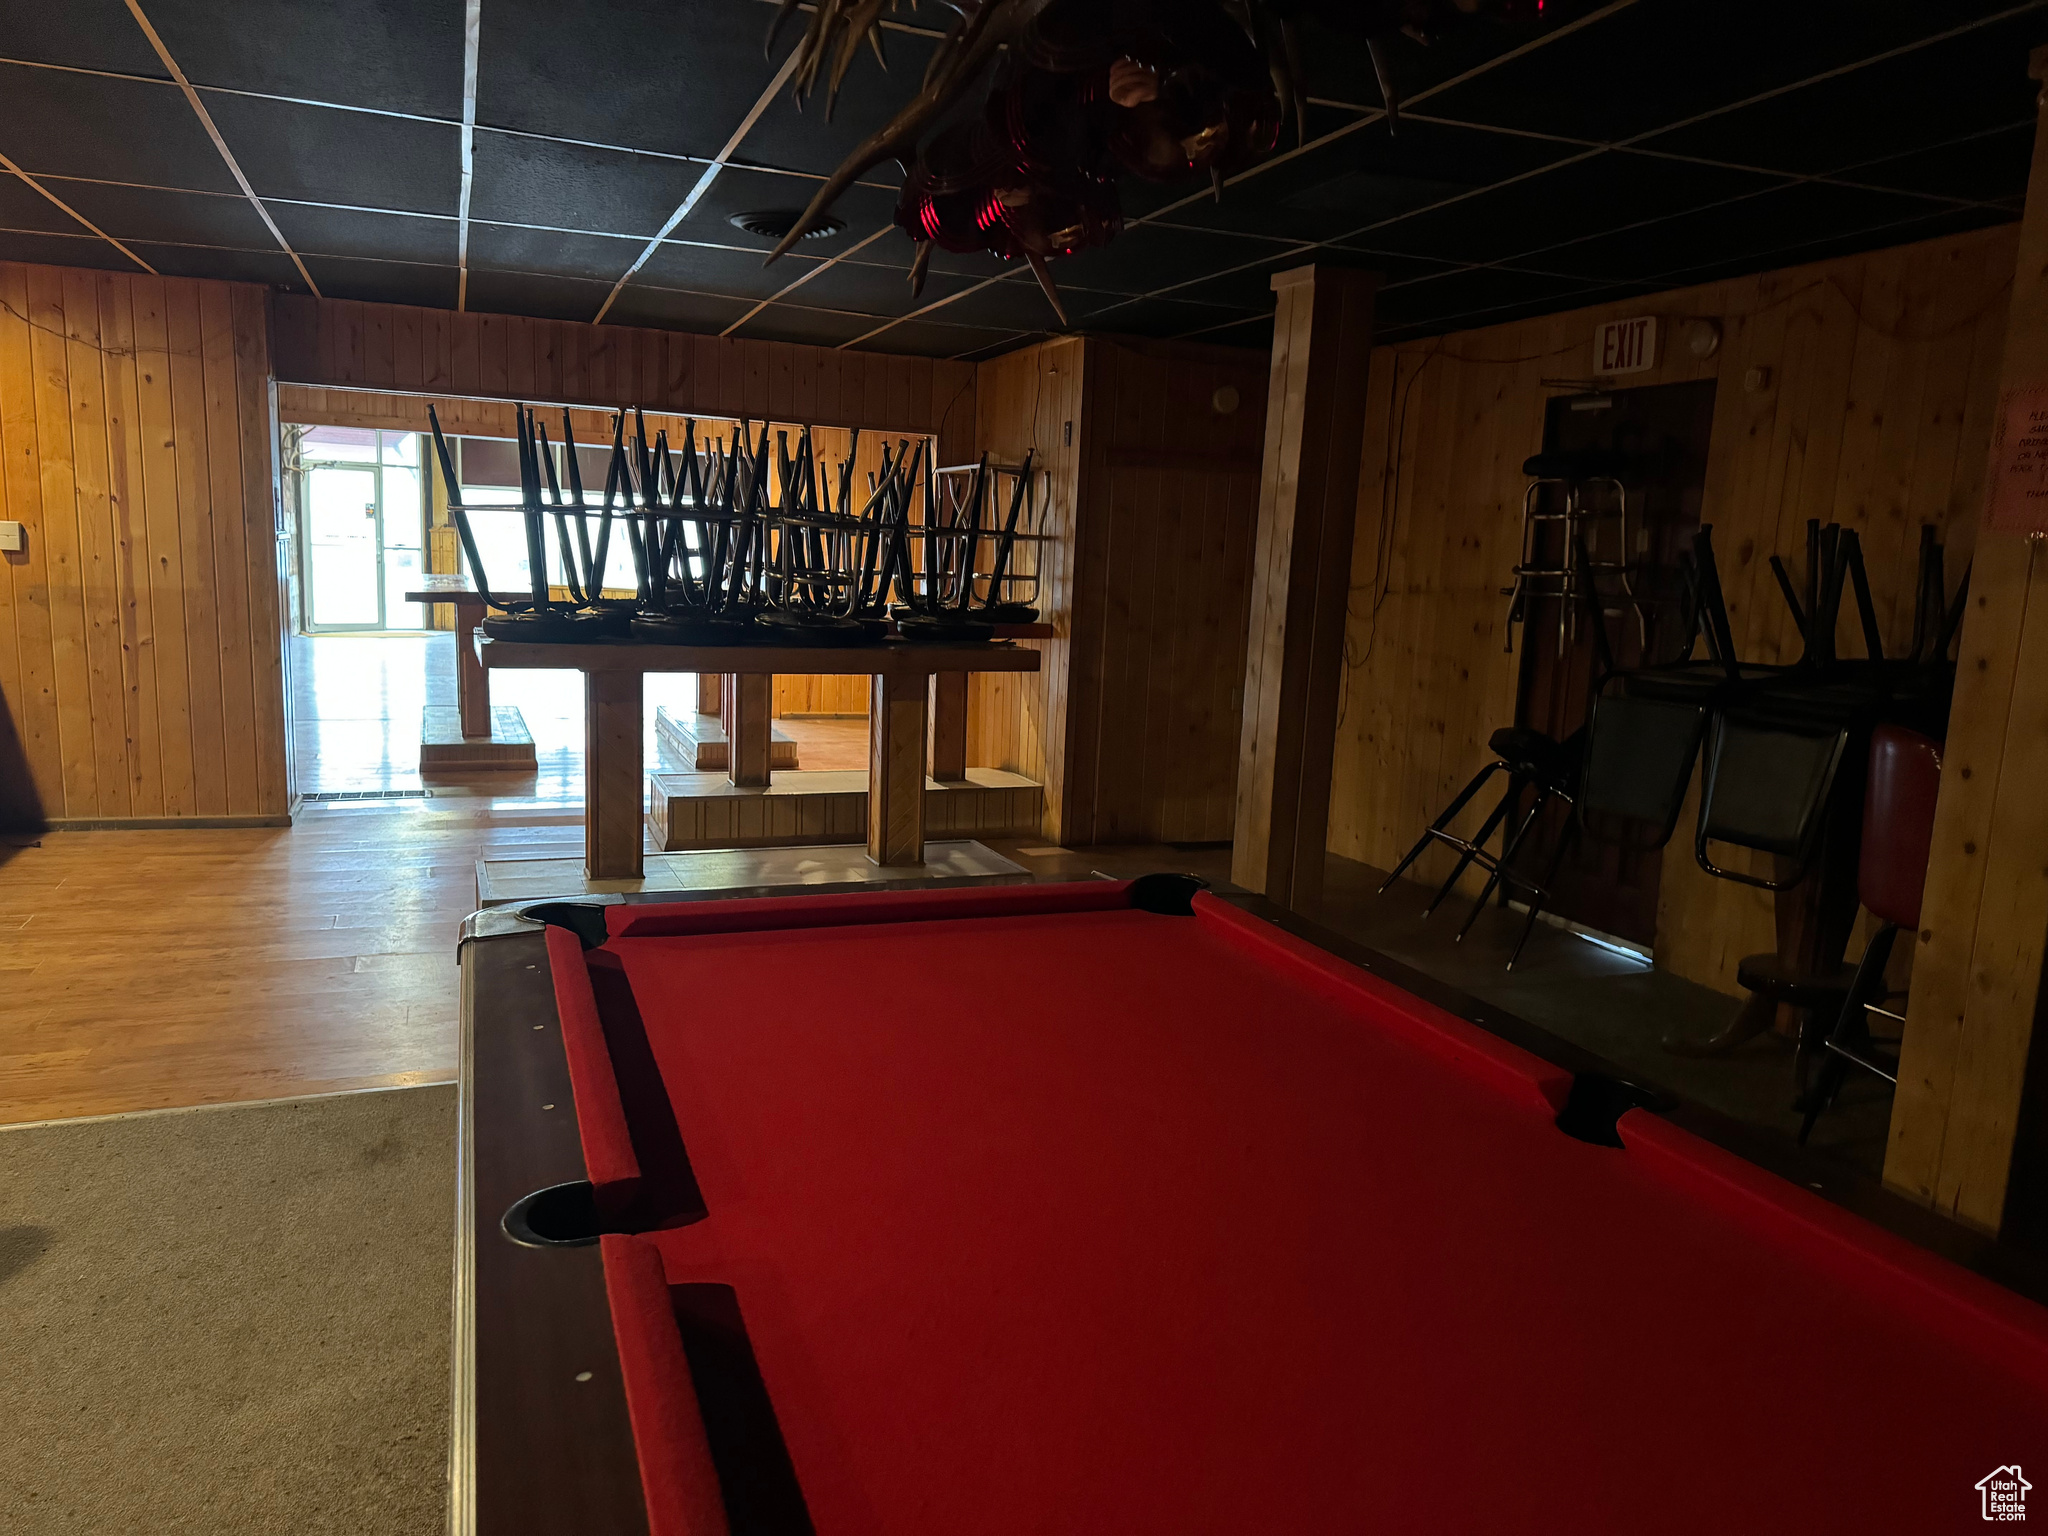 Game room with wooden walls, pool table, and carpet flooring